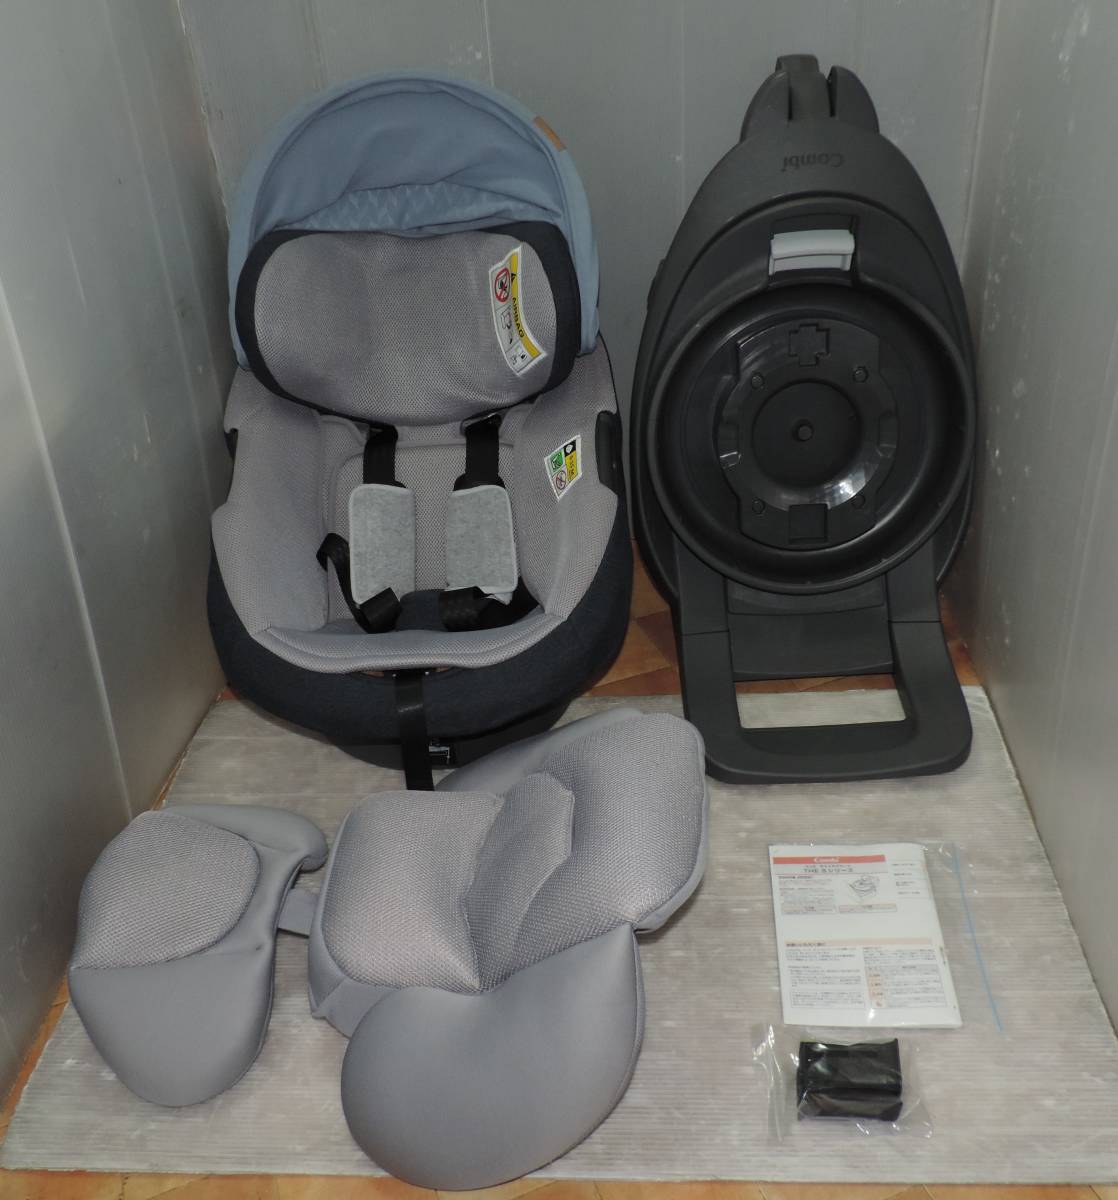  beautiful /THE S ISO FIX EG ZA-670/ newborn baby ~4 -years old about / laundry settled 